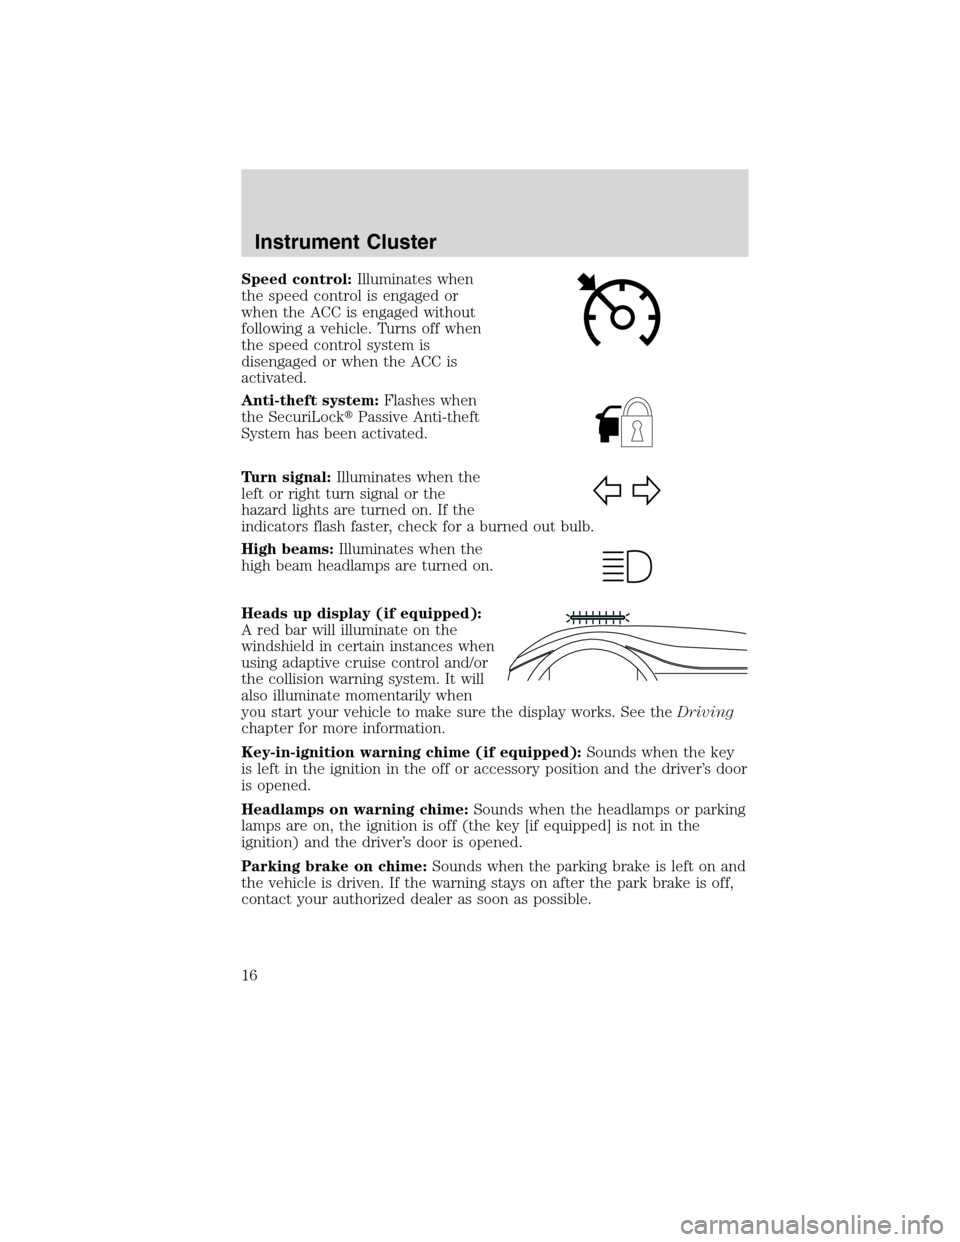 LINCOLN MKS 2010  Owners Manual Speed control:Illuminates when
the speed control is engaged or
when the ACC is engaged without
following a vehicle. Turns off when
the speed control system is
disengaged or when the ACC is
activated.
